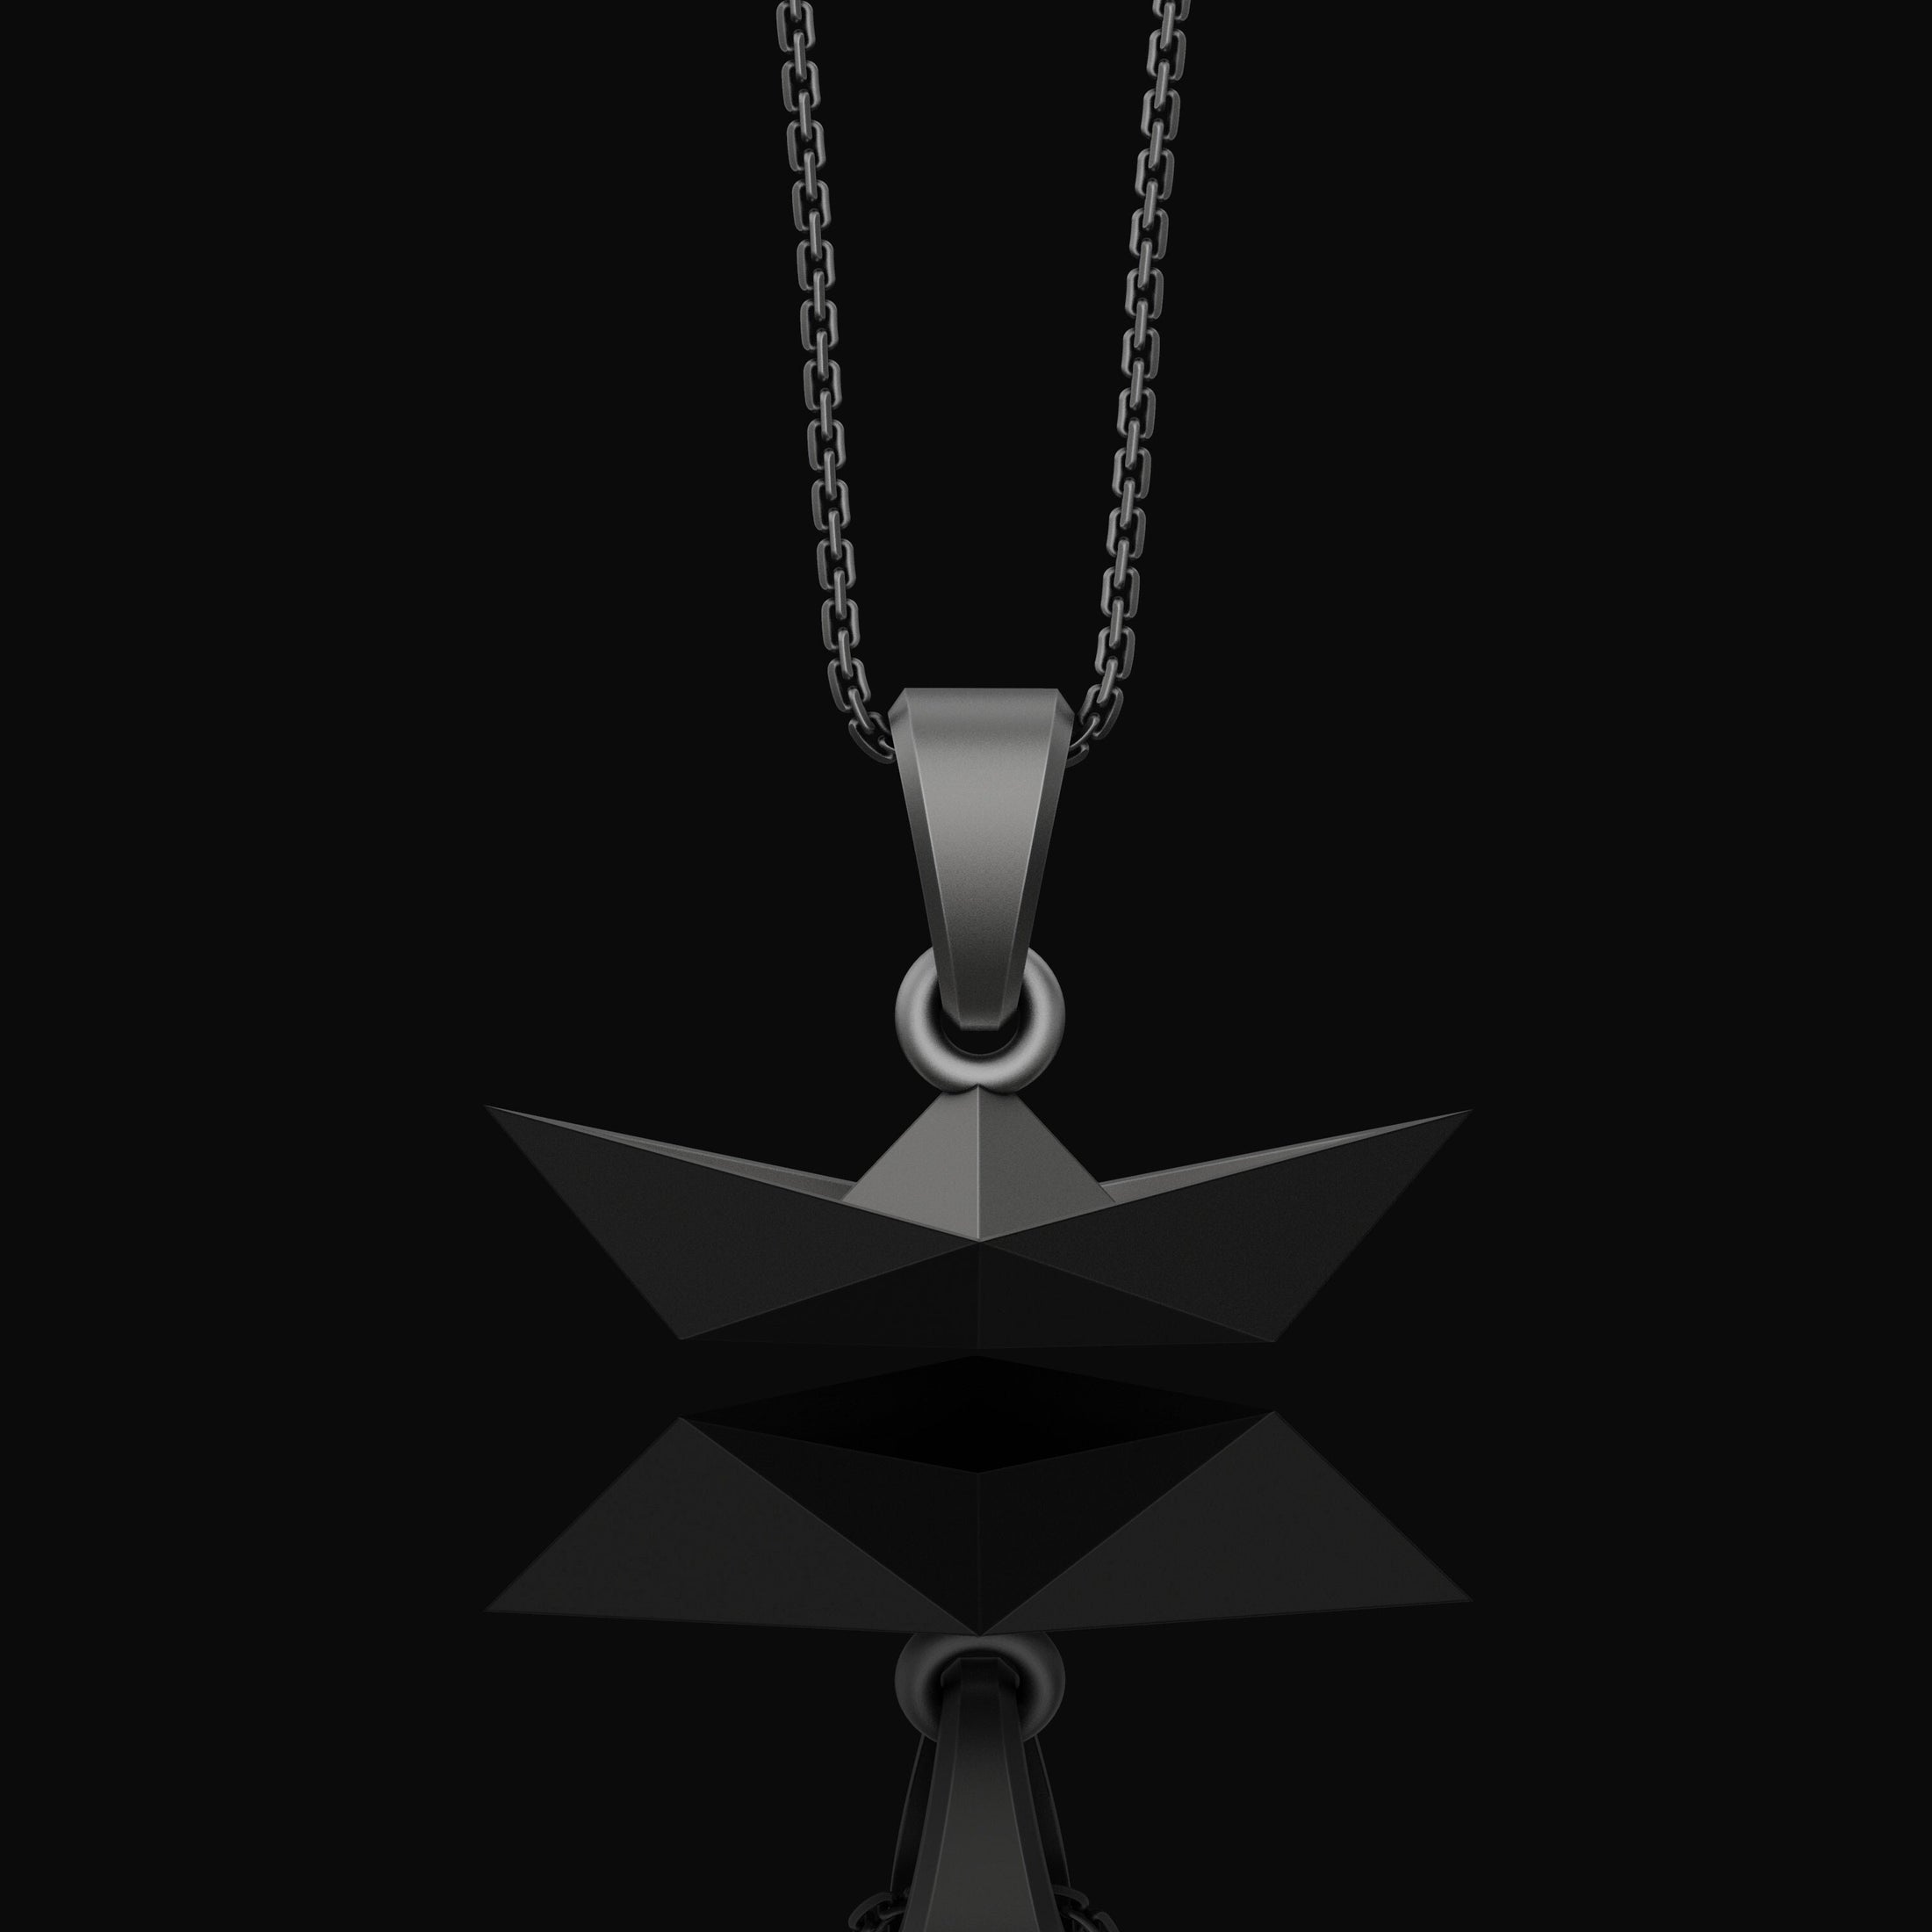 Origami Boat Pendant - Chic Geometrical Silver Necklace, Elegant Folded Boat Design, Perfect Gift for Origami Lovers